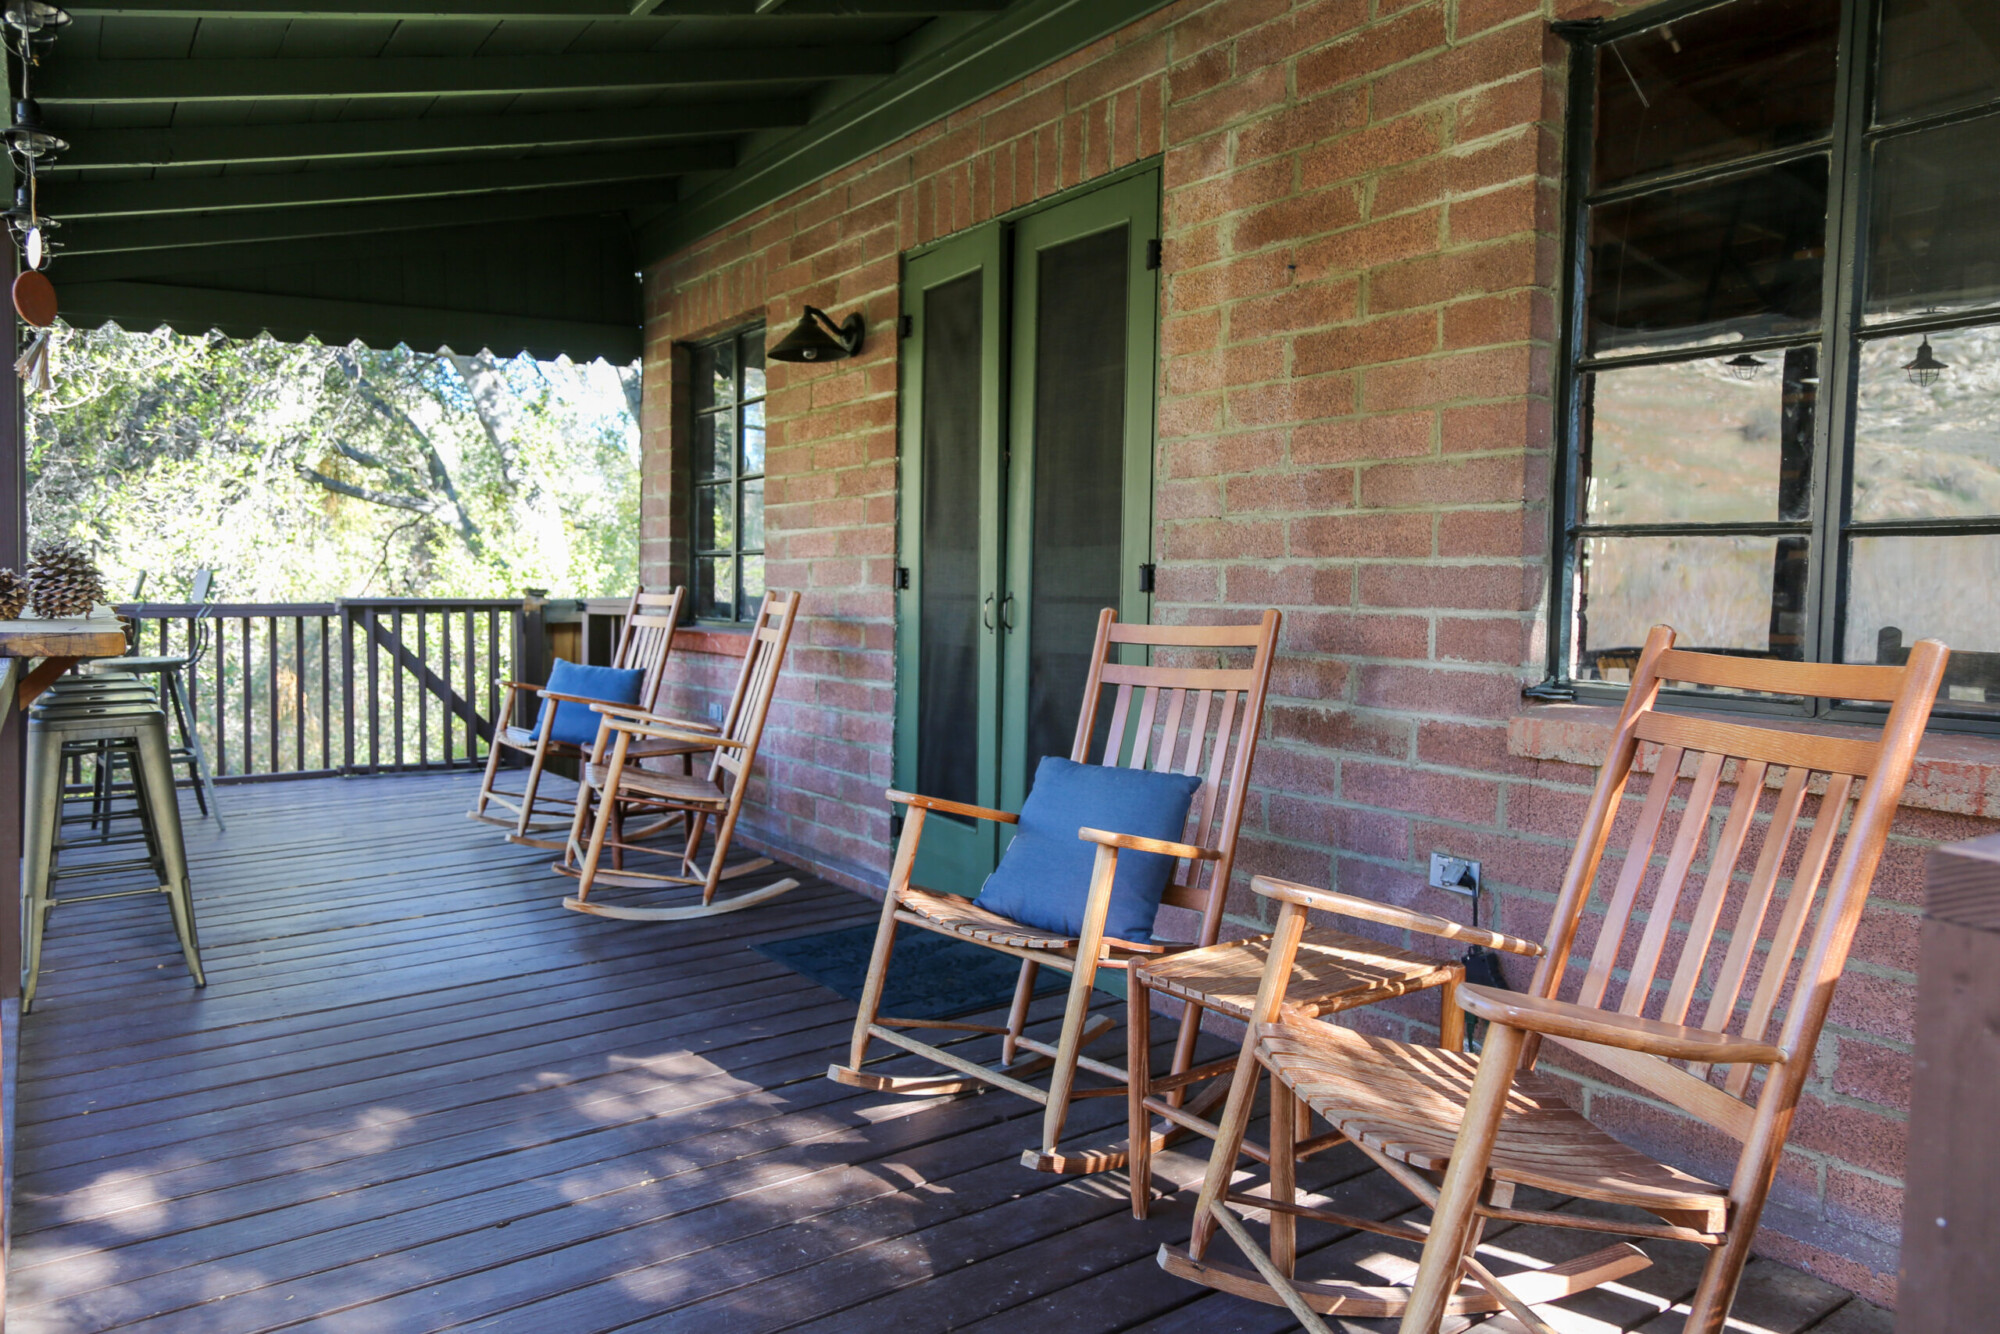 Outdoor porch with several rocking chairs and stools at Kern River House's River Willow Cabin in Kernville, California.